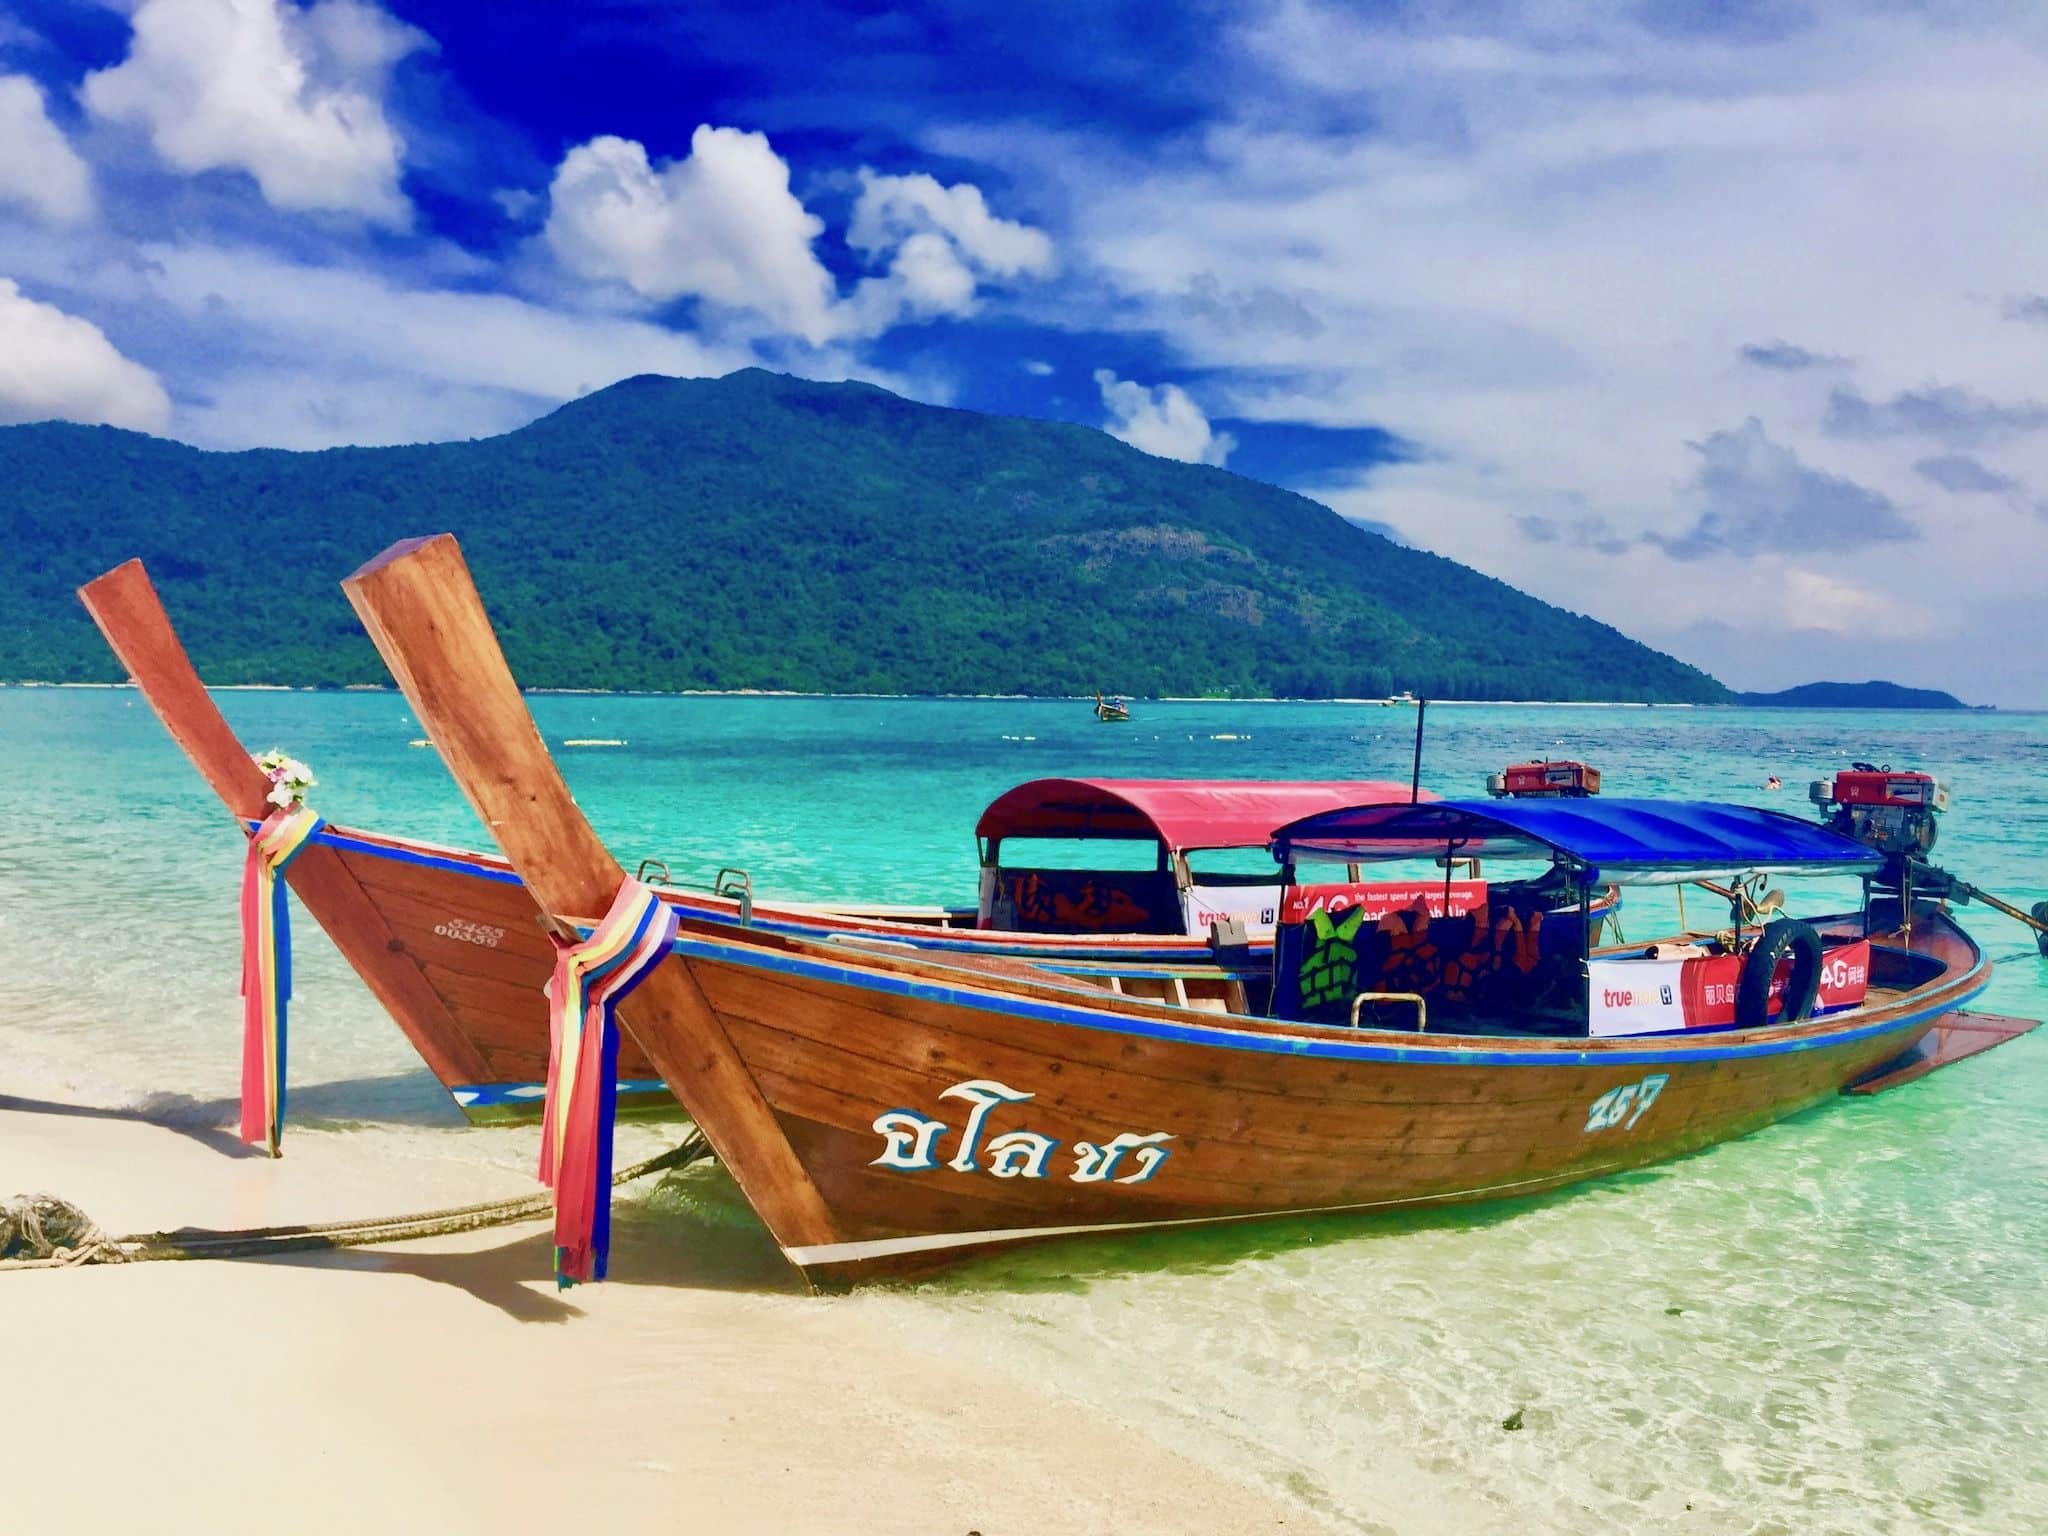 The small dream island of Koh Lipe and the islands in the surrounding Tarutao National Park are also known as the Maldives of Thailand. Photo: Sascha Tegtmeyer